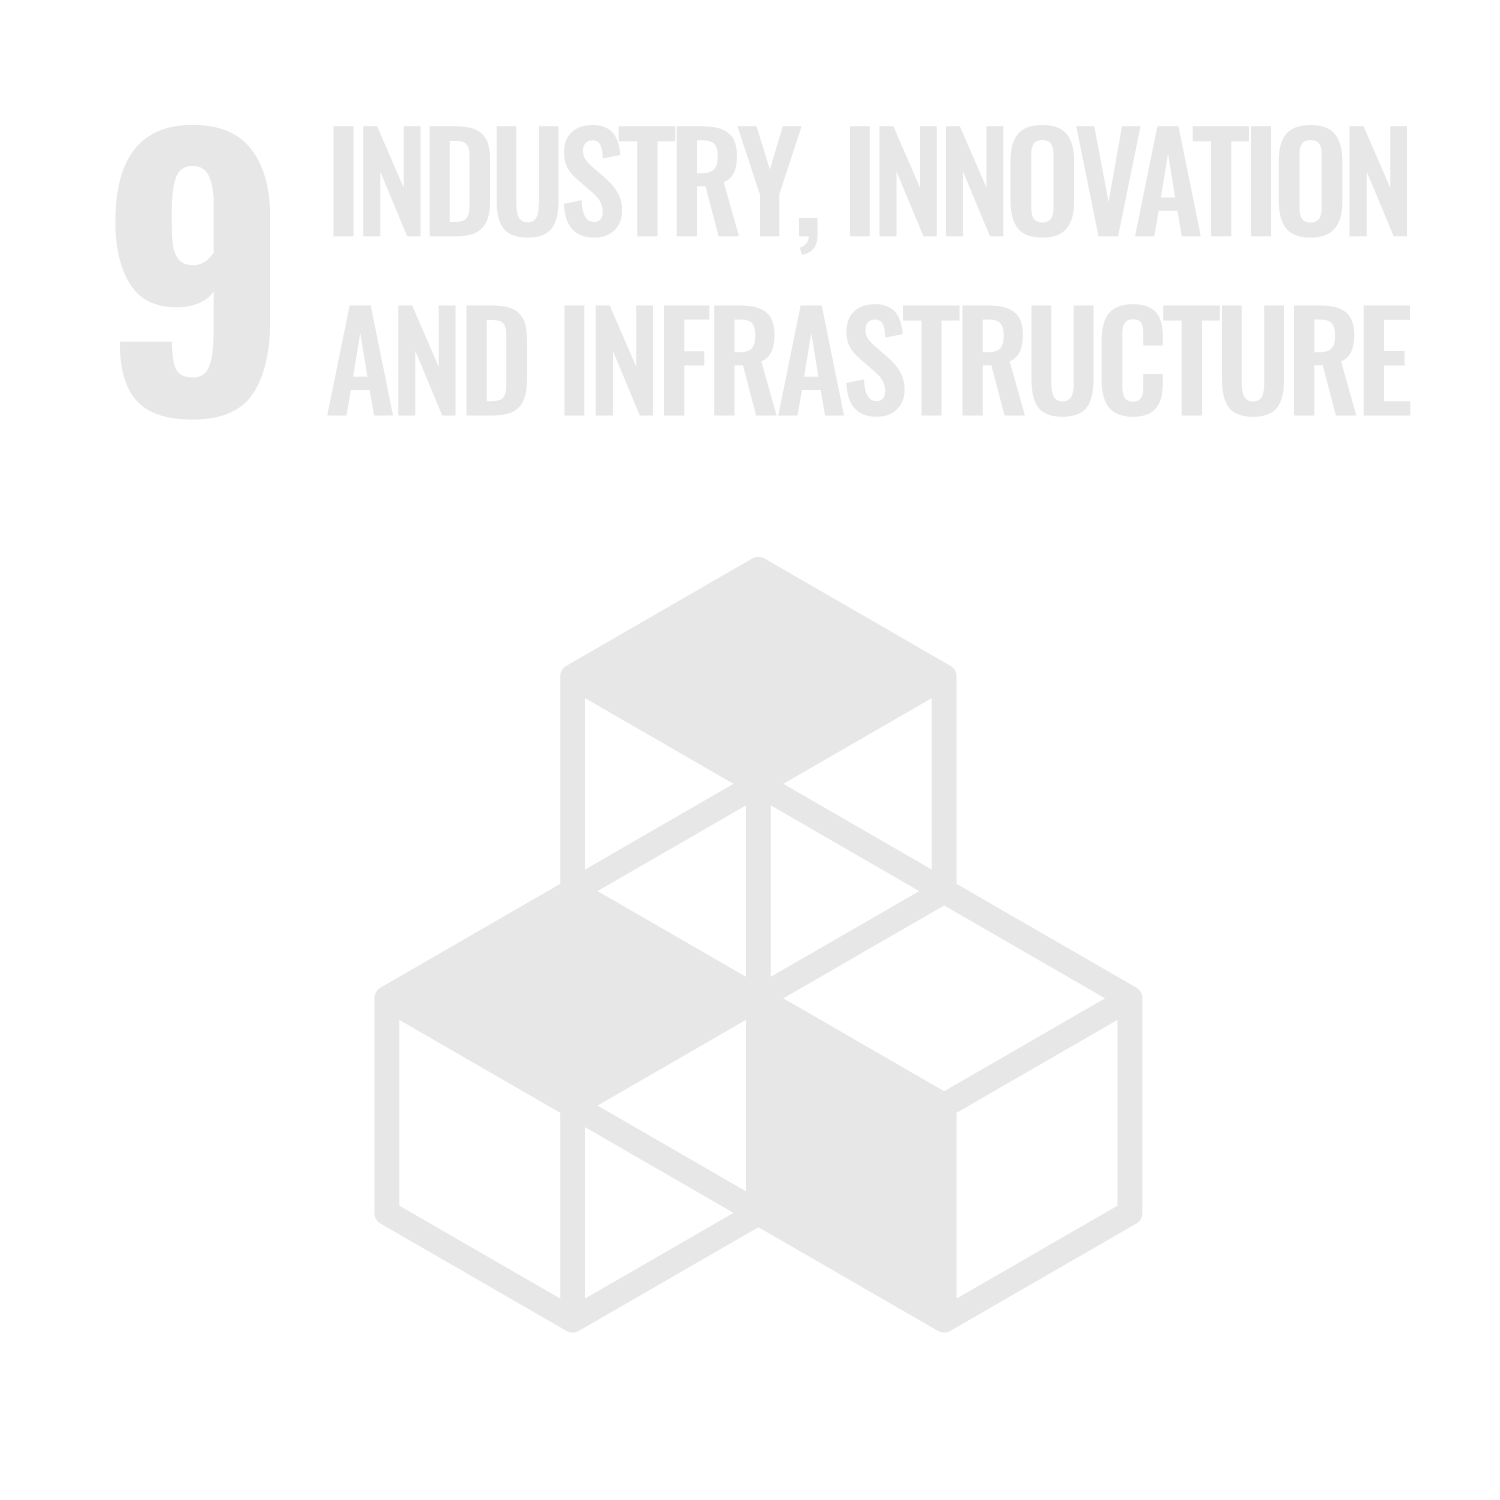 9 industry innovation and infrastructure